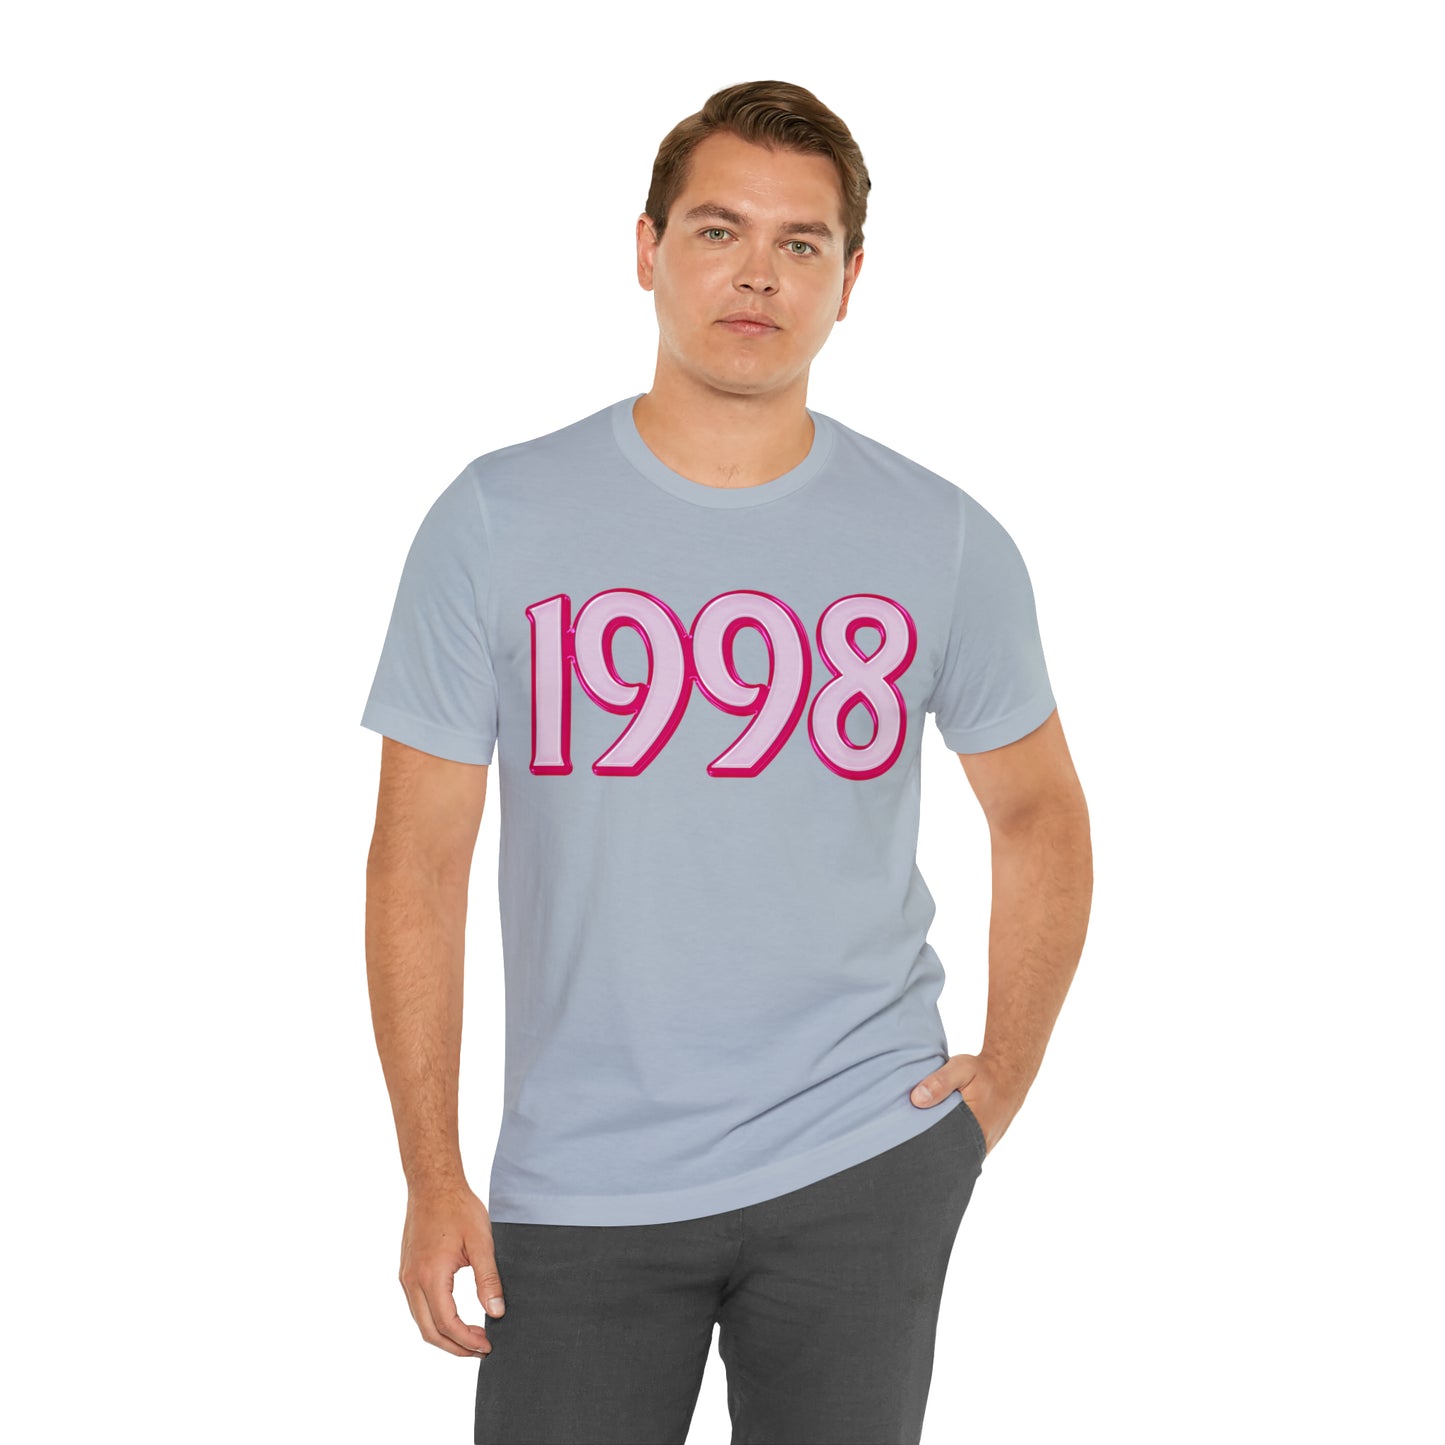 1998 Pink shirt for Lady Birthday Gift, 1998 Retro Number T shirt, 1998 Birthday Year Number shirt for Women, Pink Shirt For Women, T814